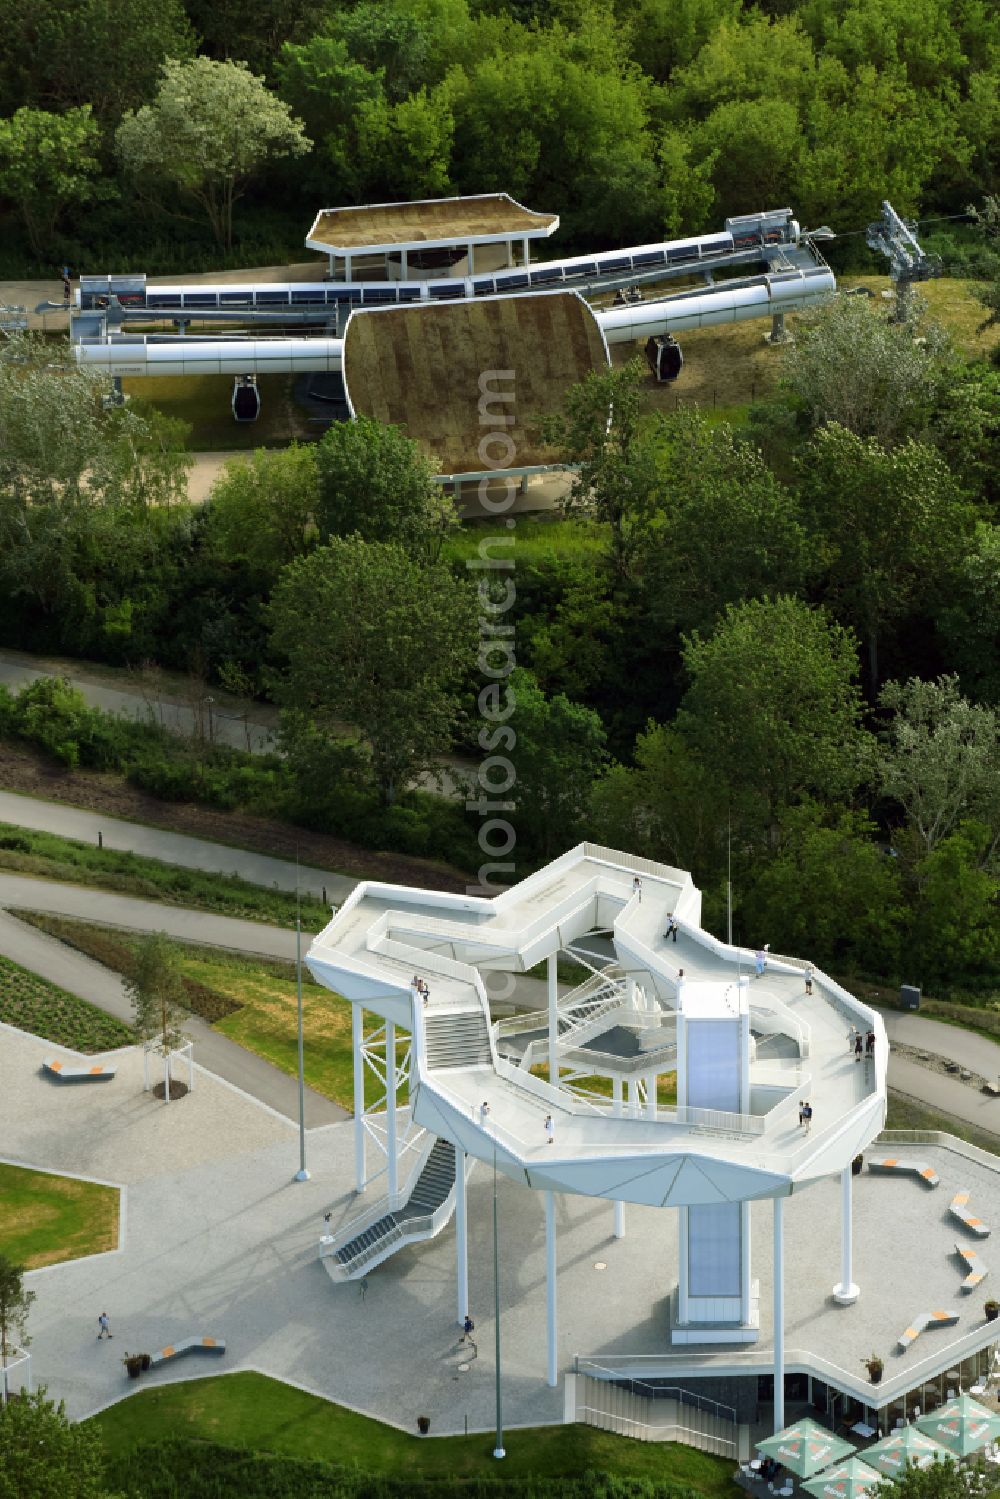 Aerial image Berlin - Visitor platform on park Wolkenhain on Kienberg on the former grounds of the IGA 2017 in the district of Marzahn in Berlin